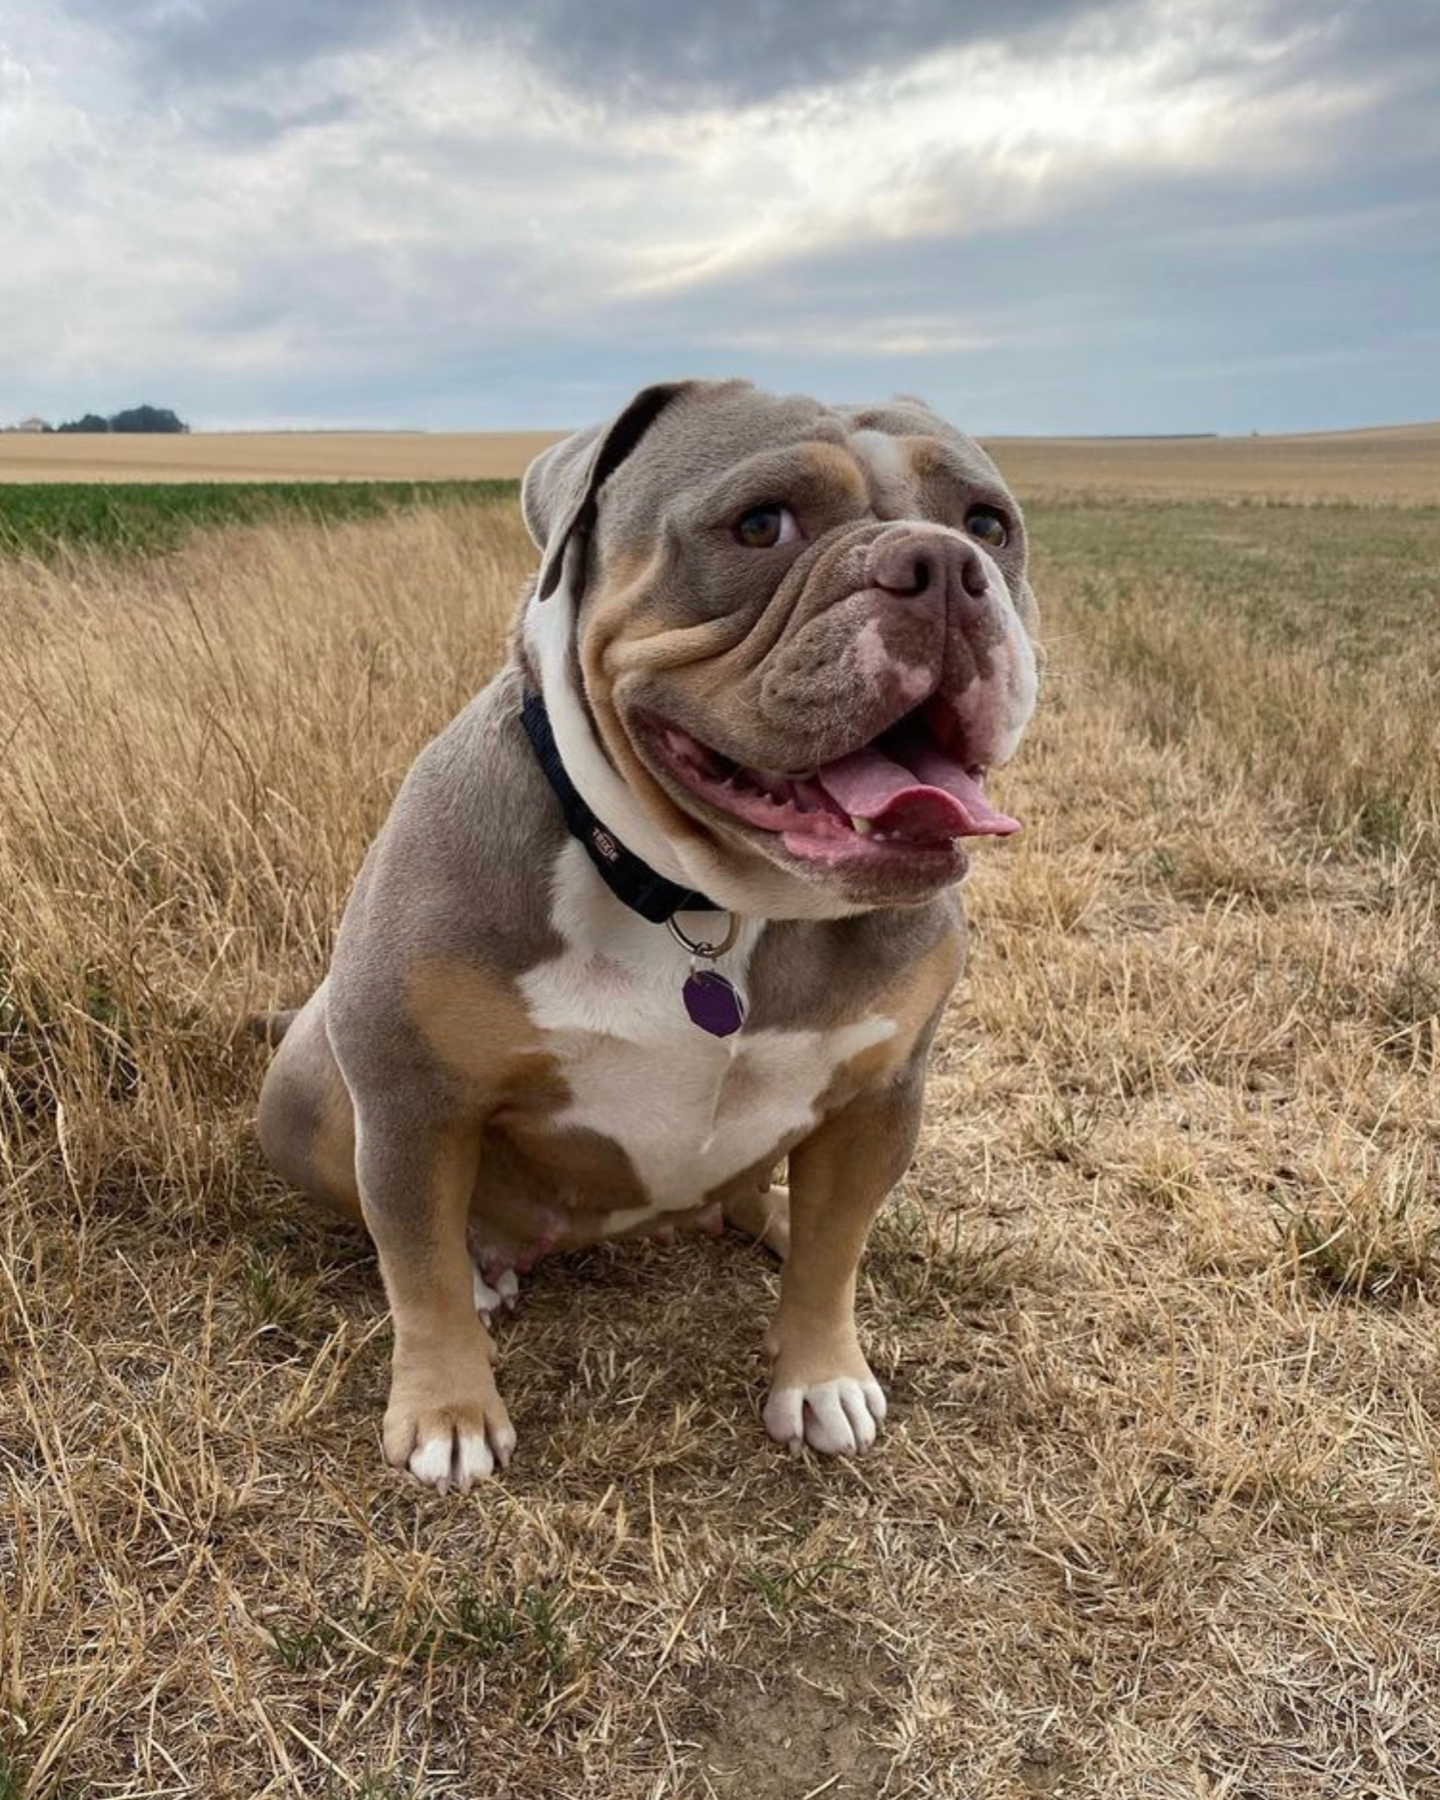 An adorable dog smiling at the camera while sitting on a field